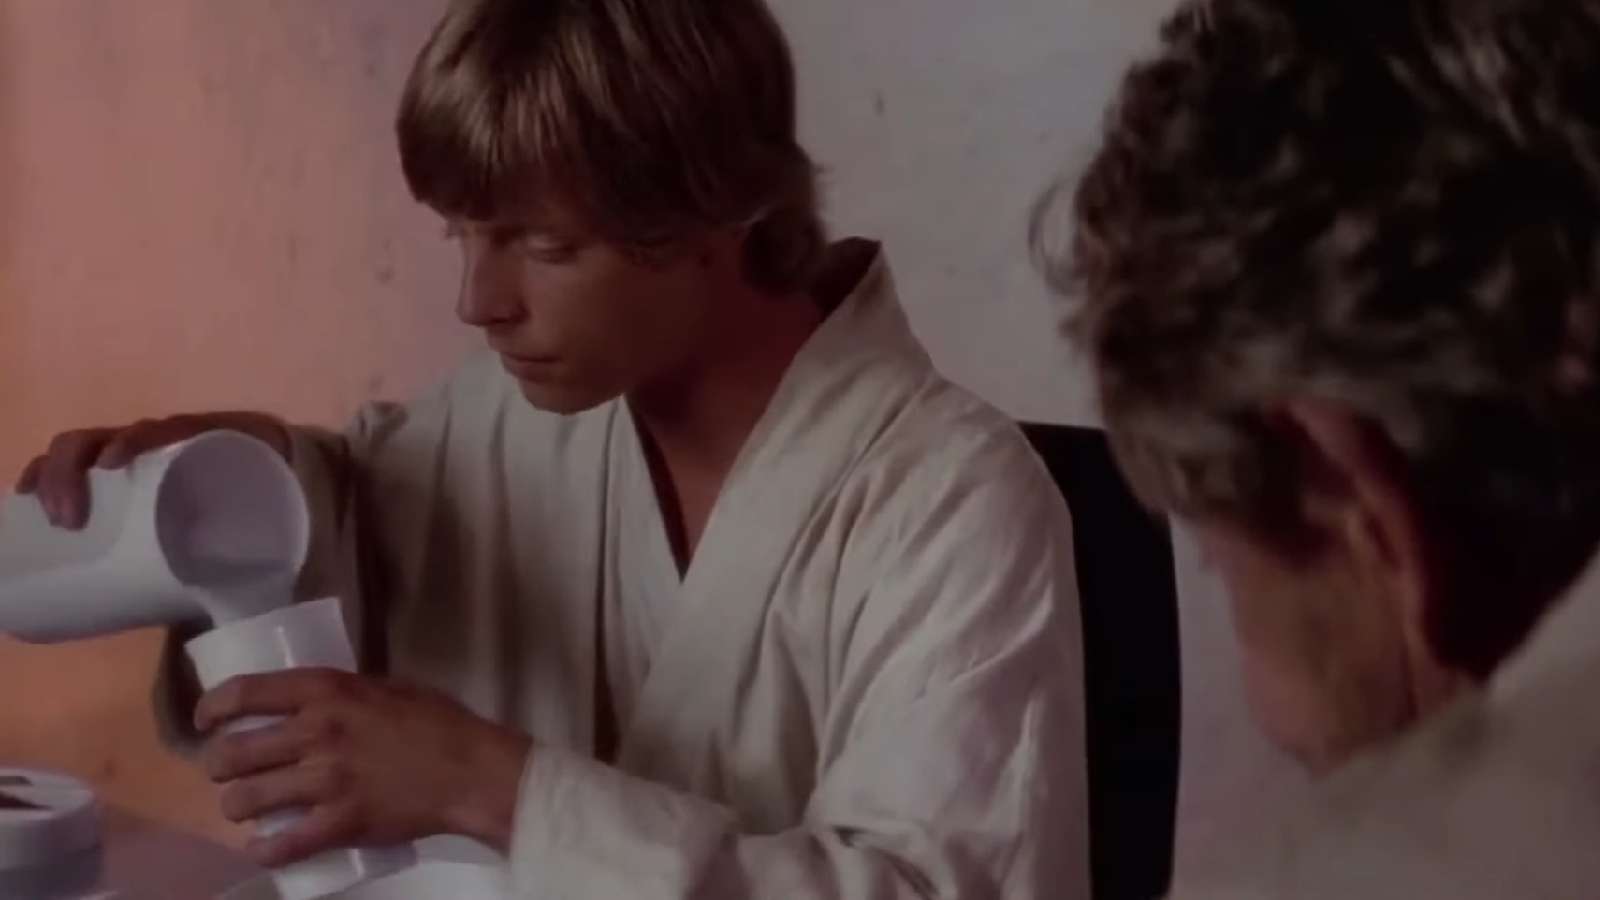 Blue Milk's first appearance in Star Wars